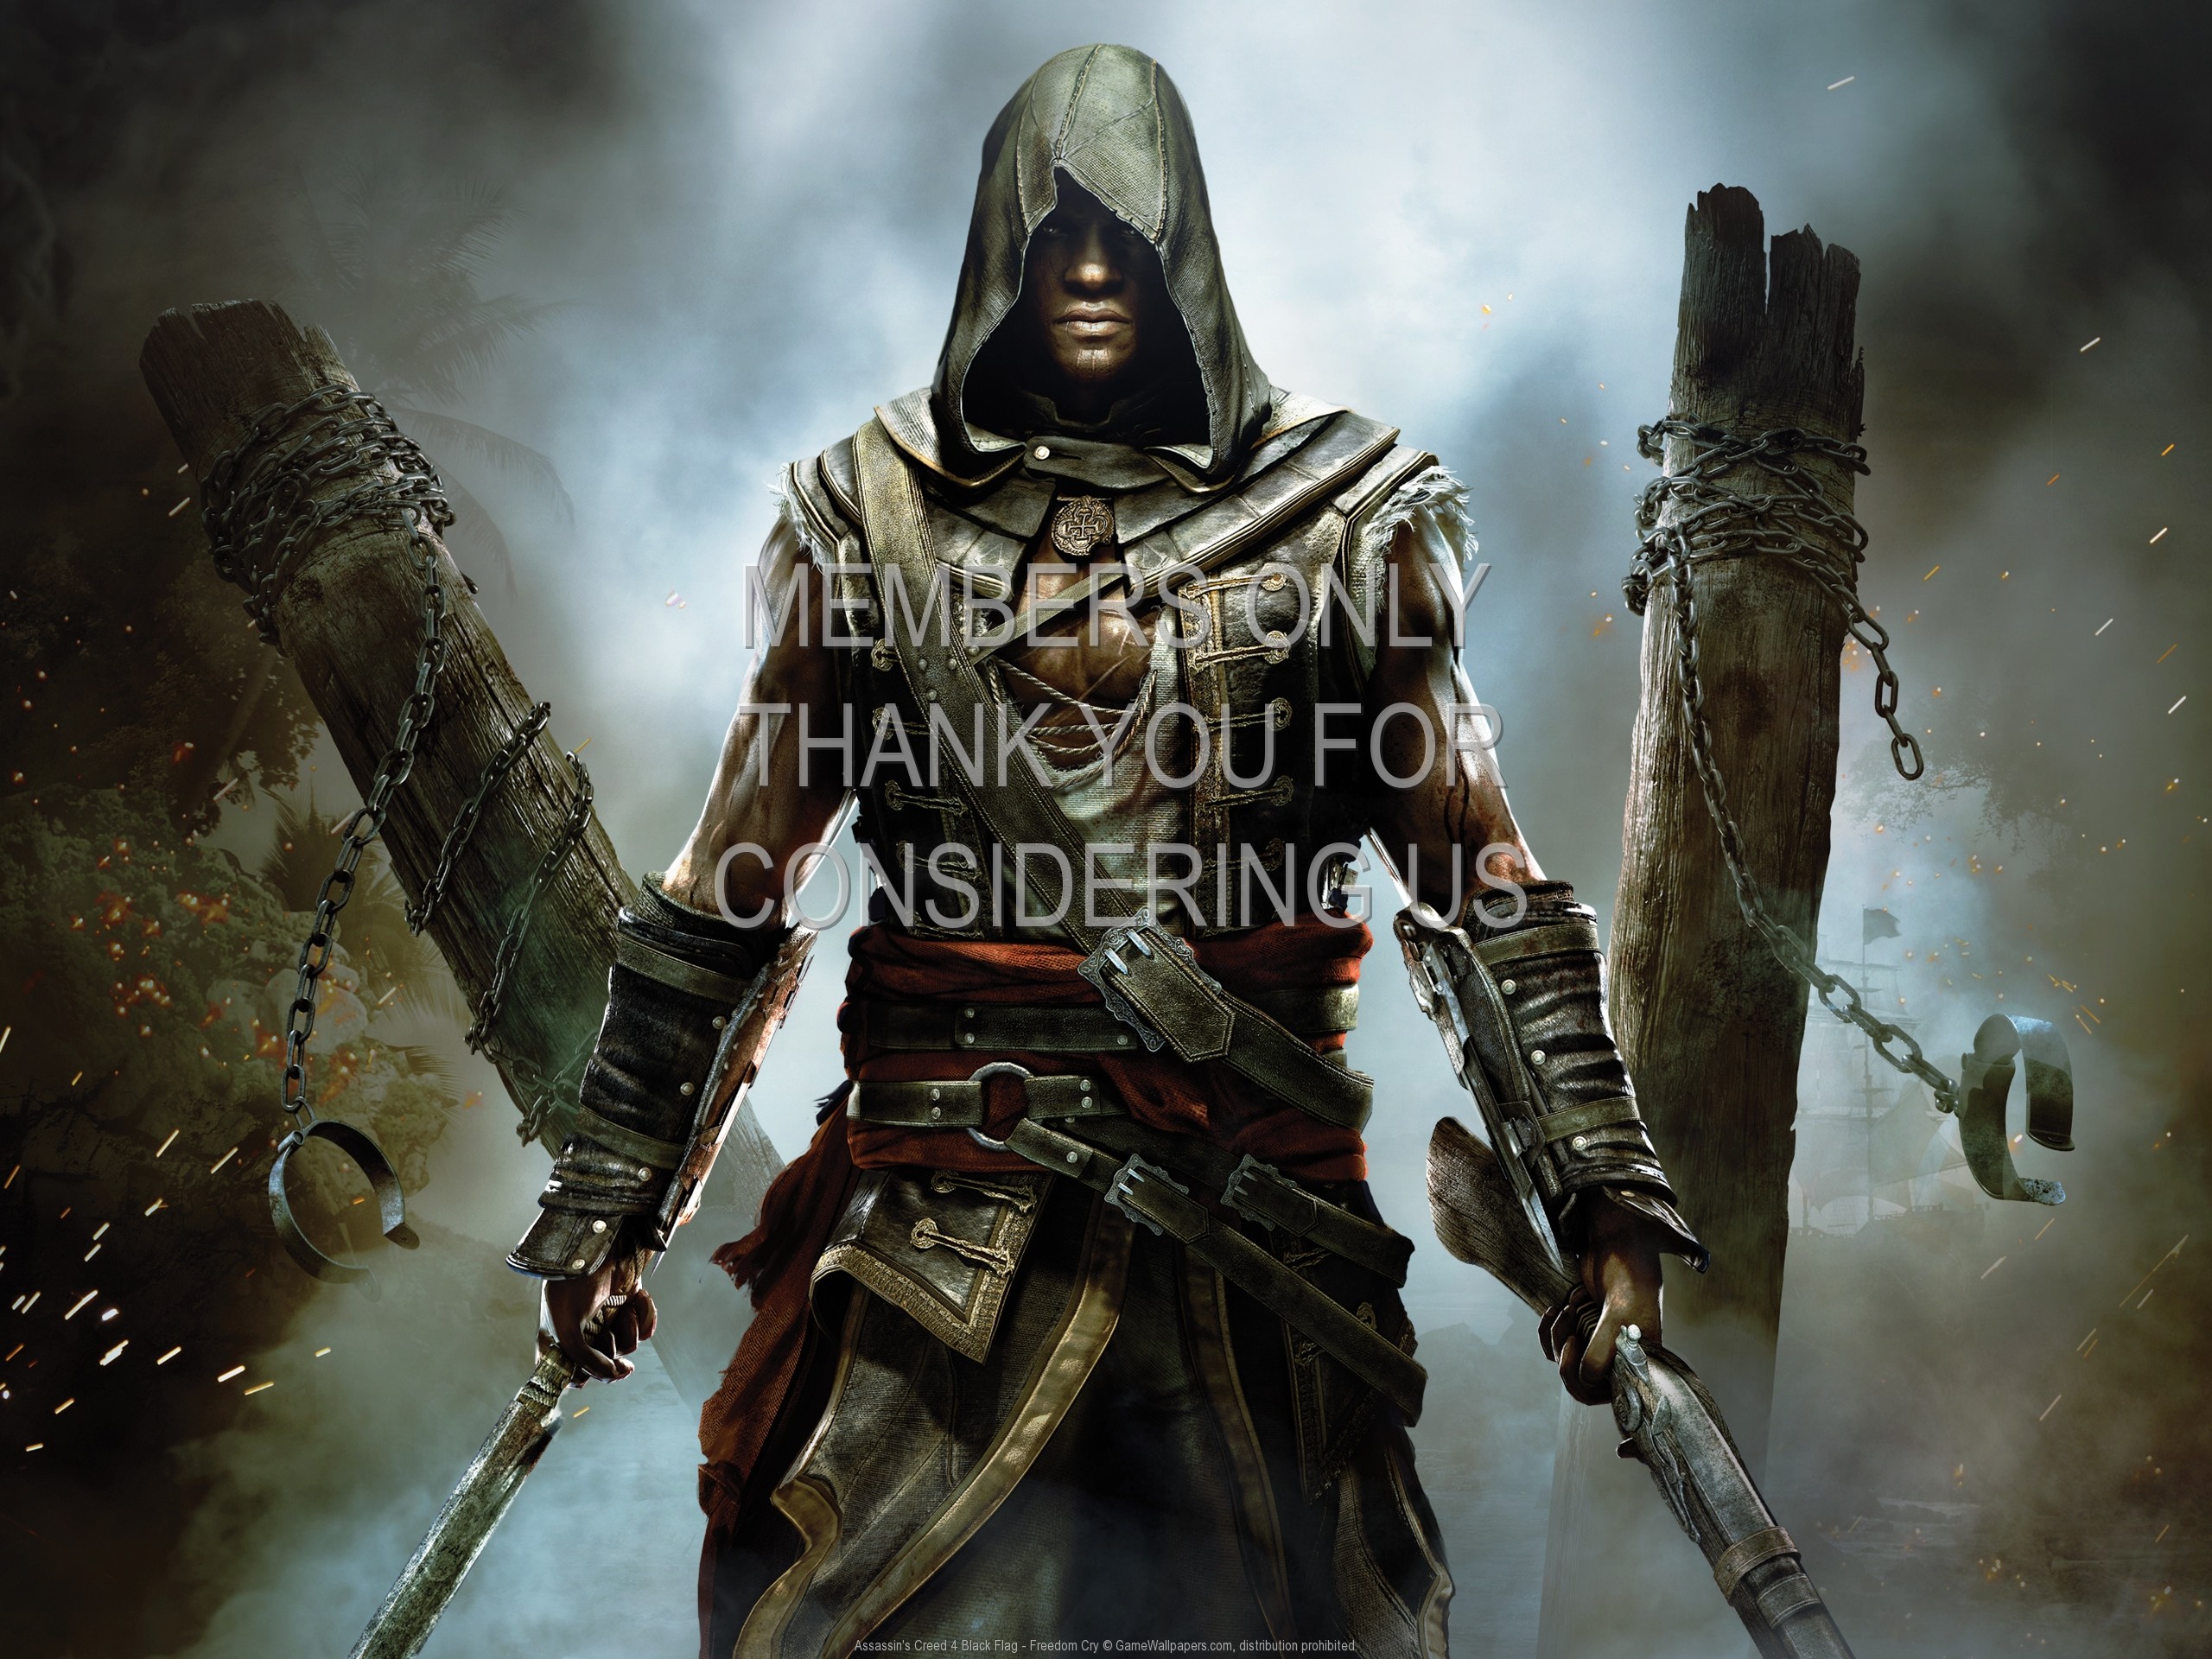 ac4 wallpaper,action adventure game,pc game,cg artwork,fictional character,action figure